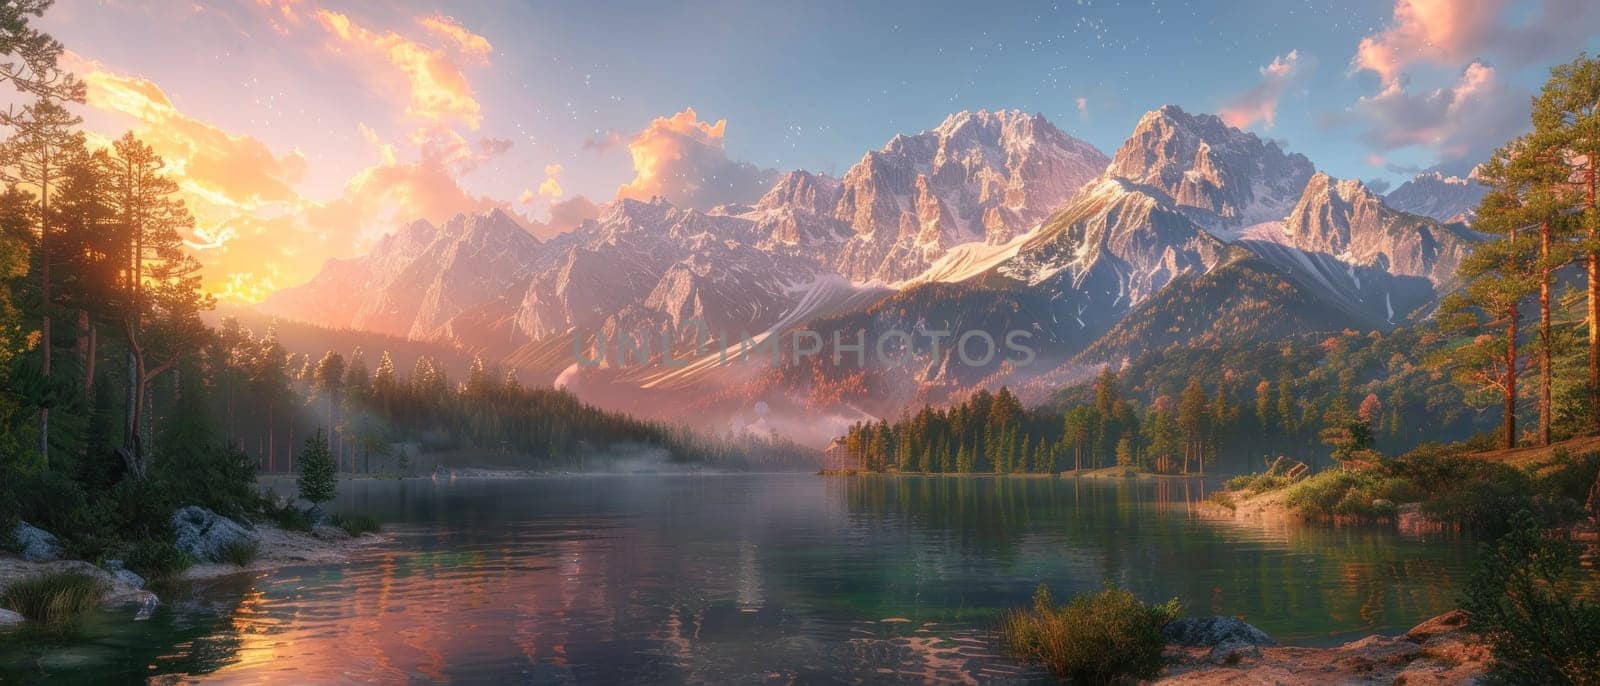 A beautiful mountain range with a lake in the foreground by golfmerrymaker